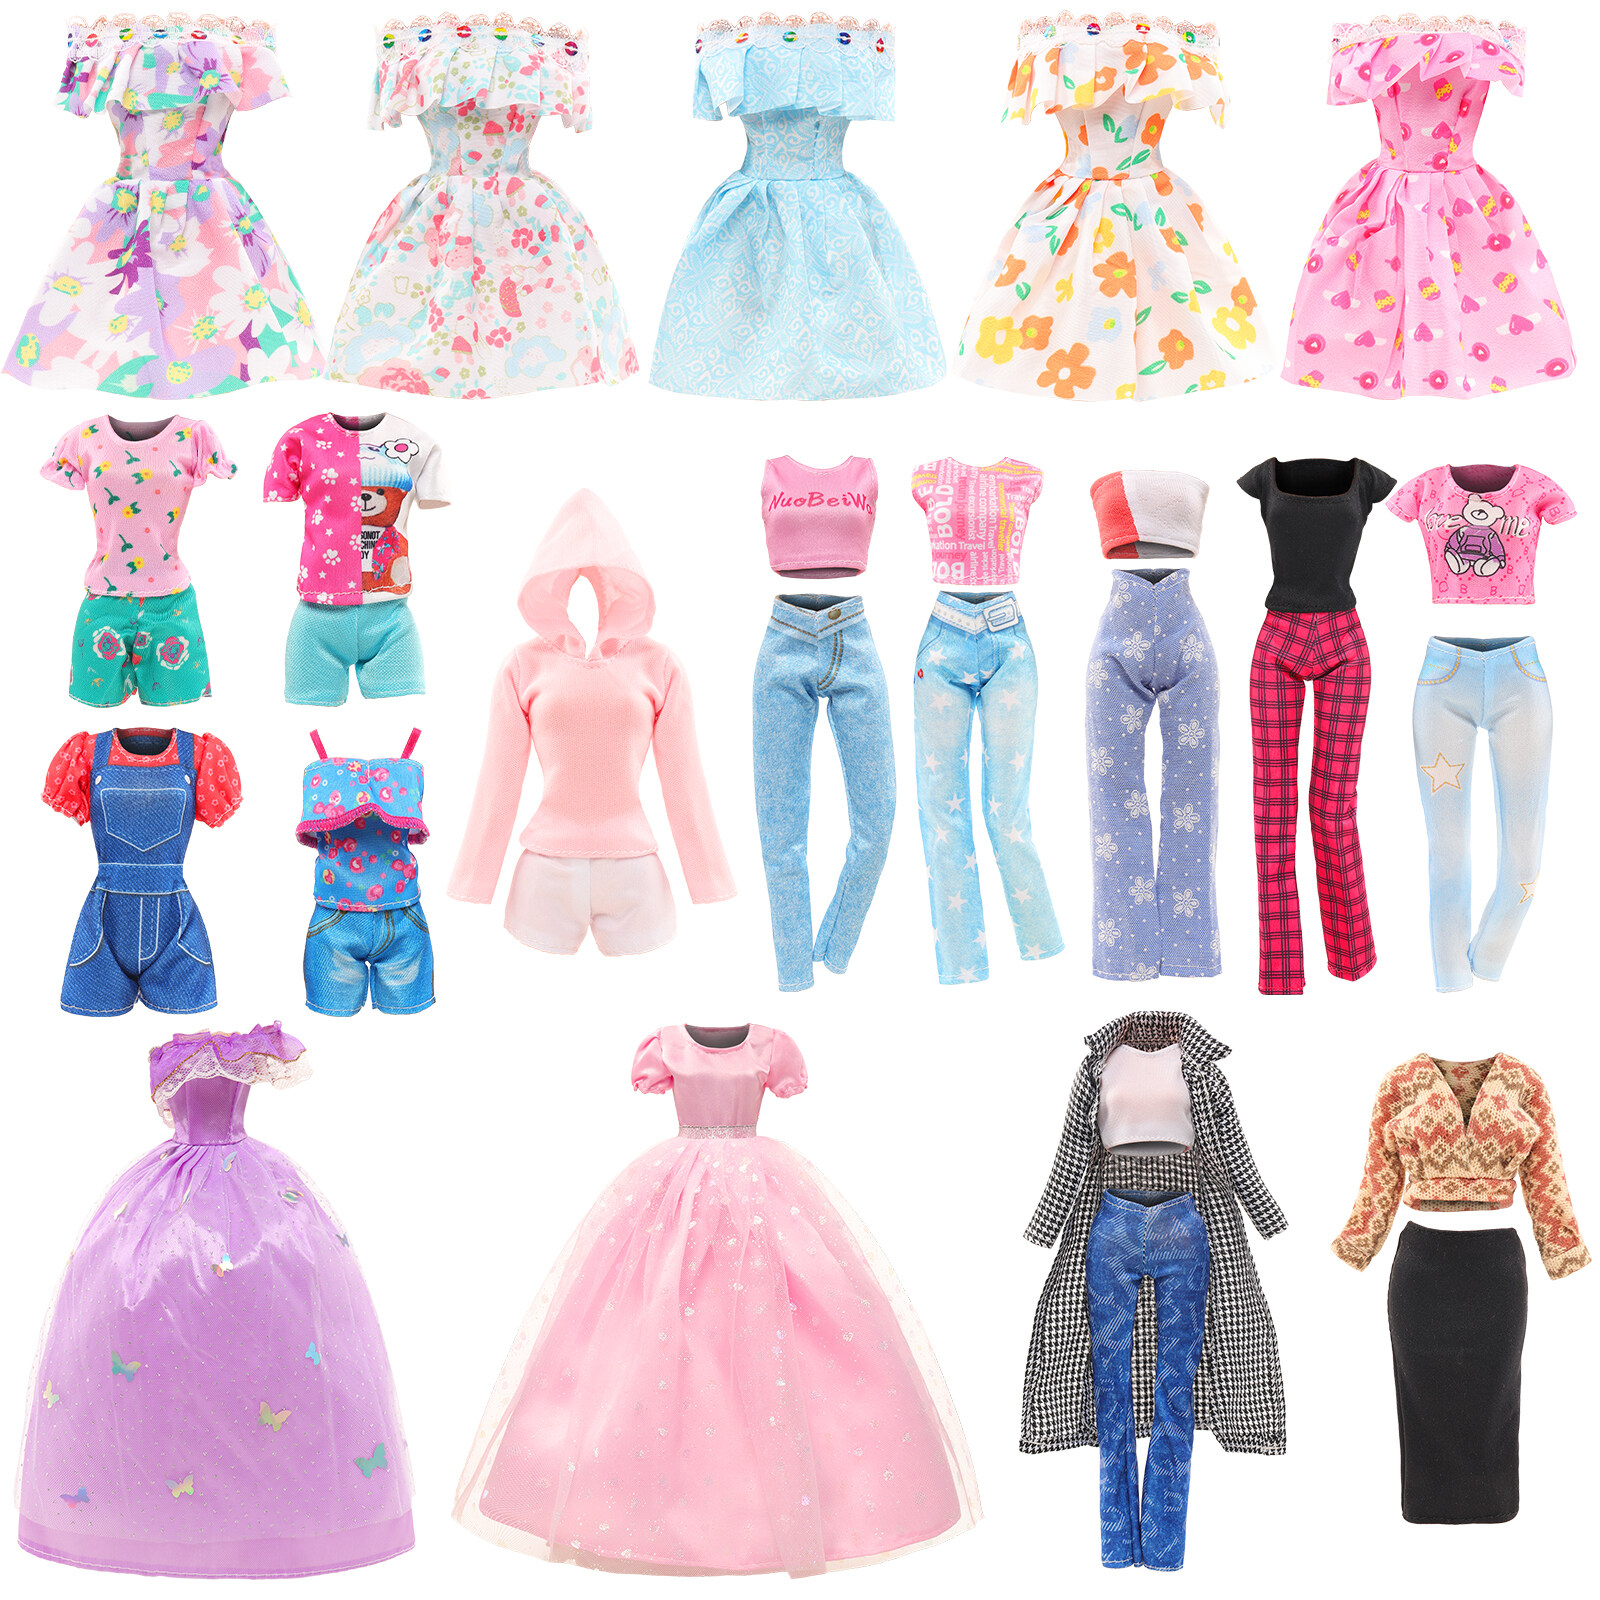 Barwa 18 Pcs Fashion For Barbie Doll Clothes and Accessories=Fixed 2 Sets  of Autumn Clothing Sets+2 Large Dress+3 Pieces of Floral Dress+2 Sets of  Tops and Pants+2 Sets of Tops and Shorts